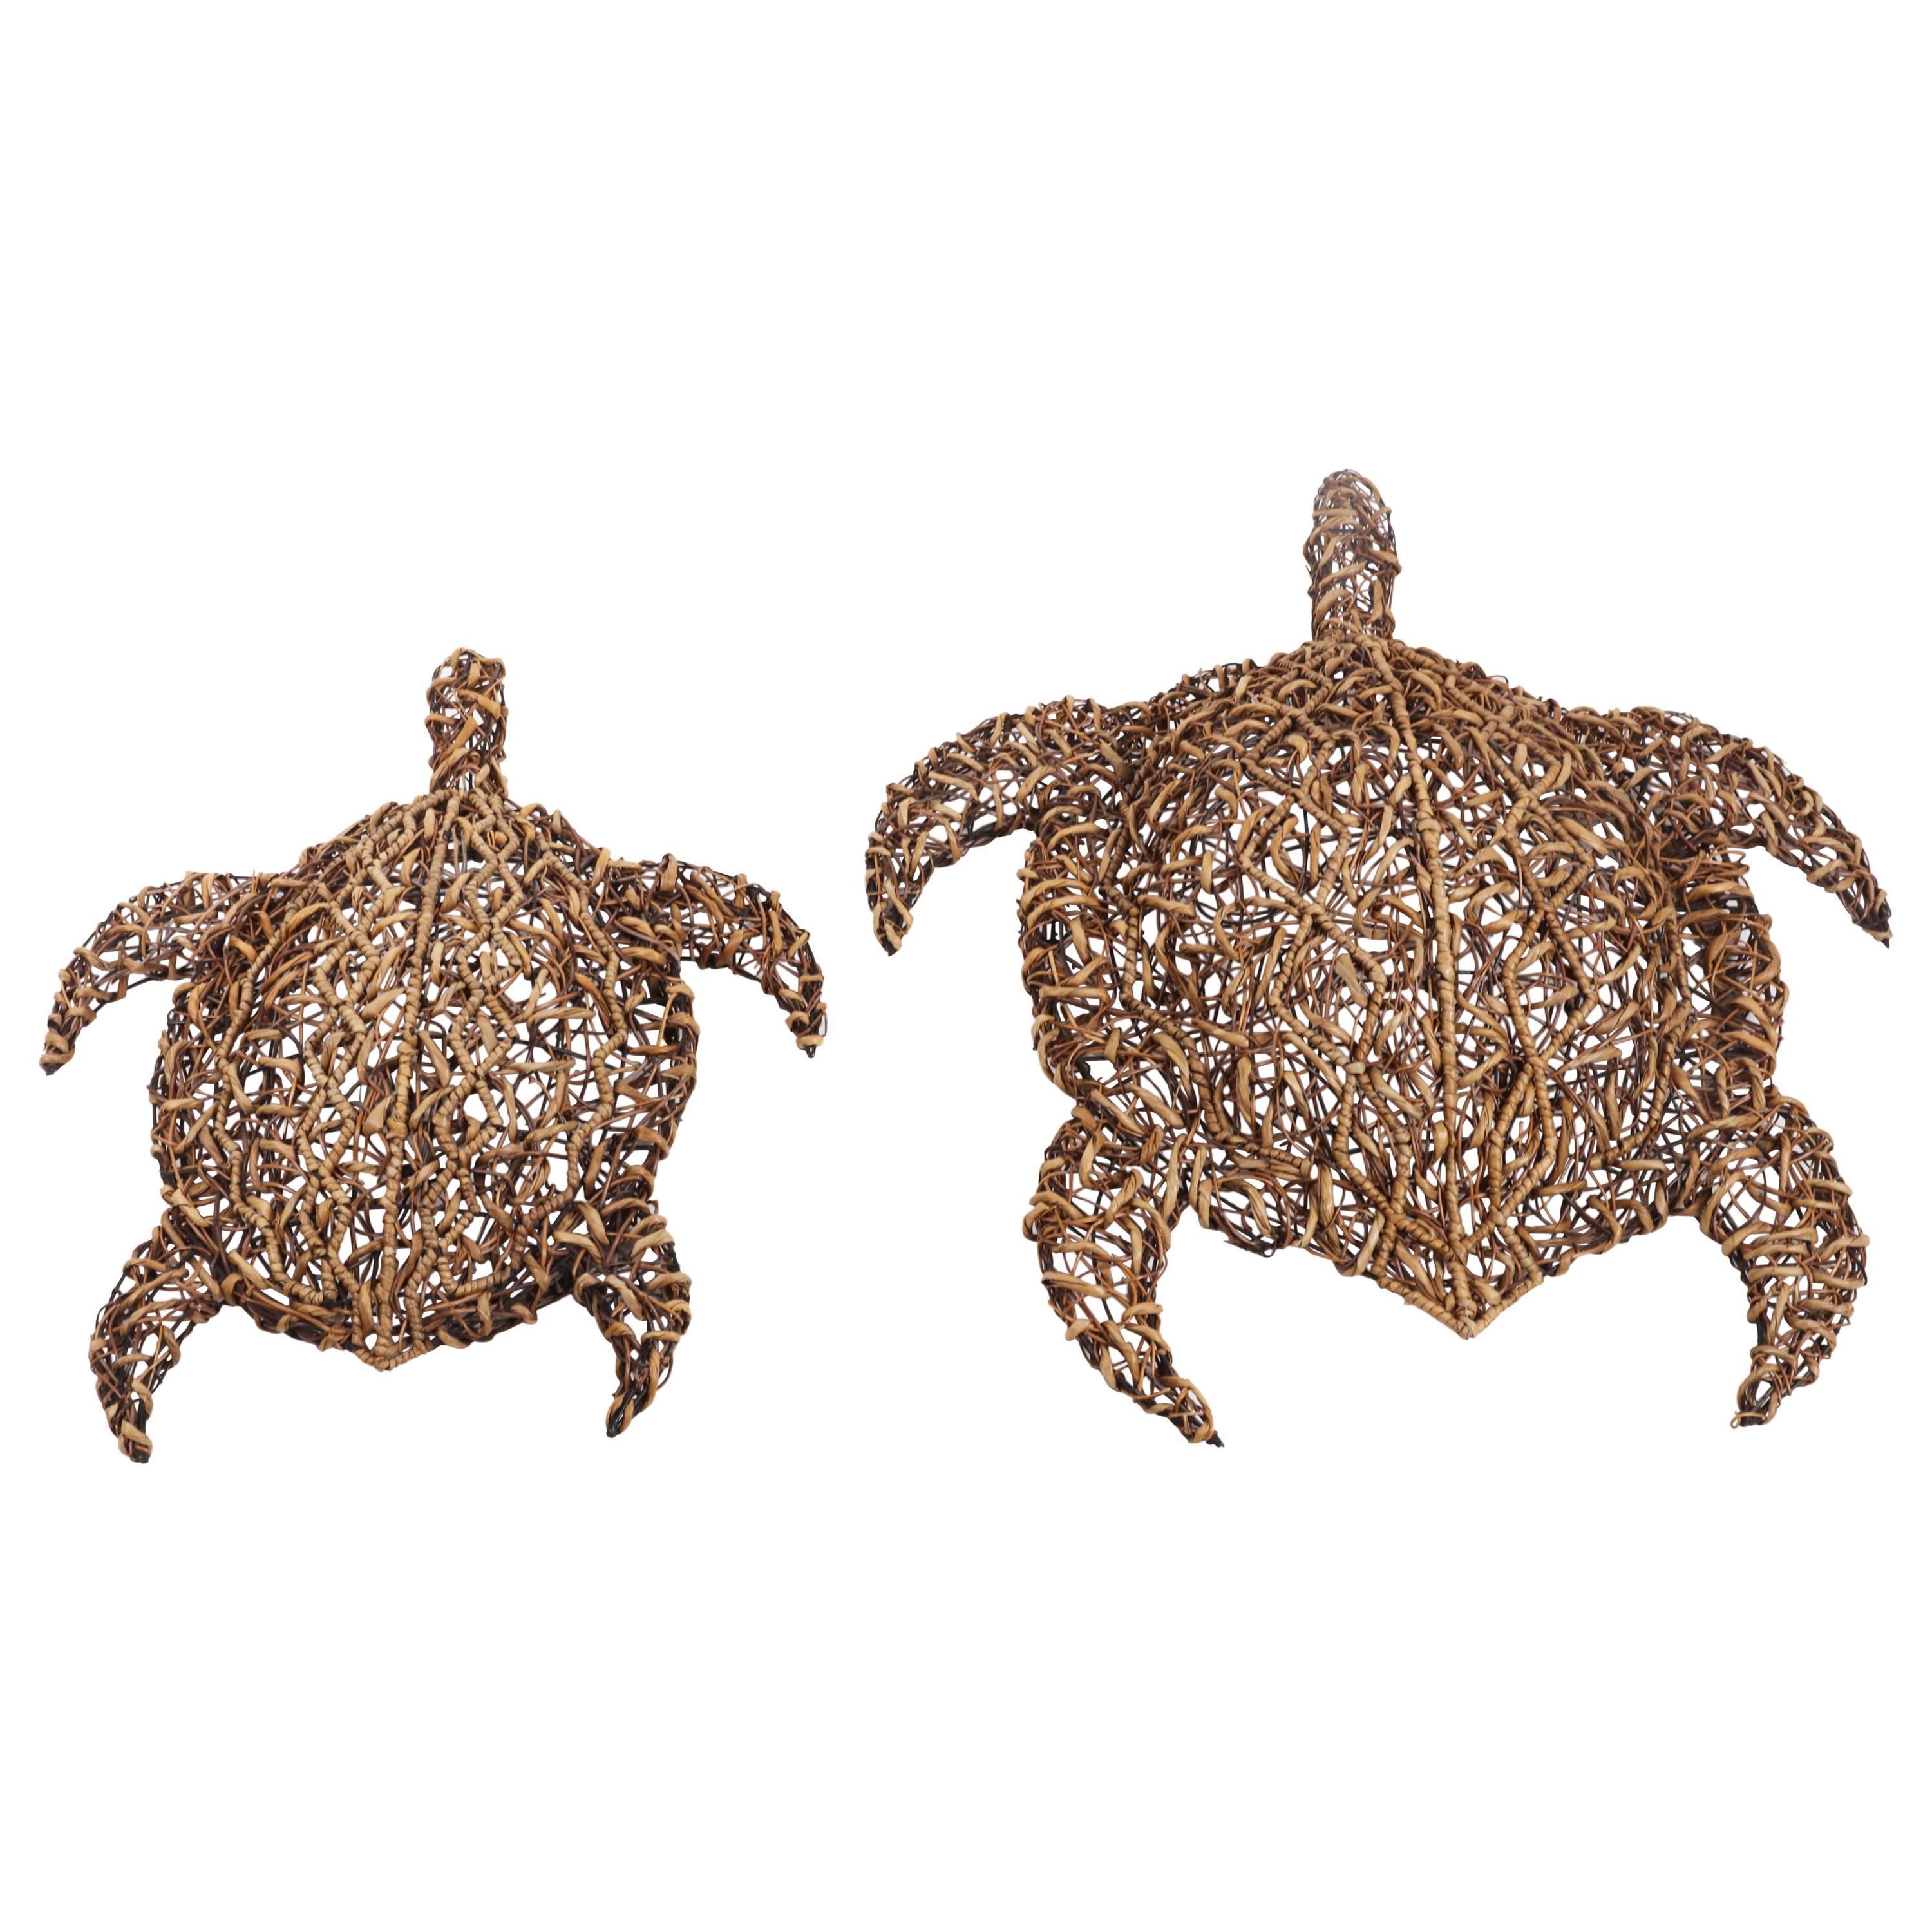 Pair of Woven Basket Turtle Lights